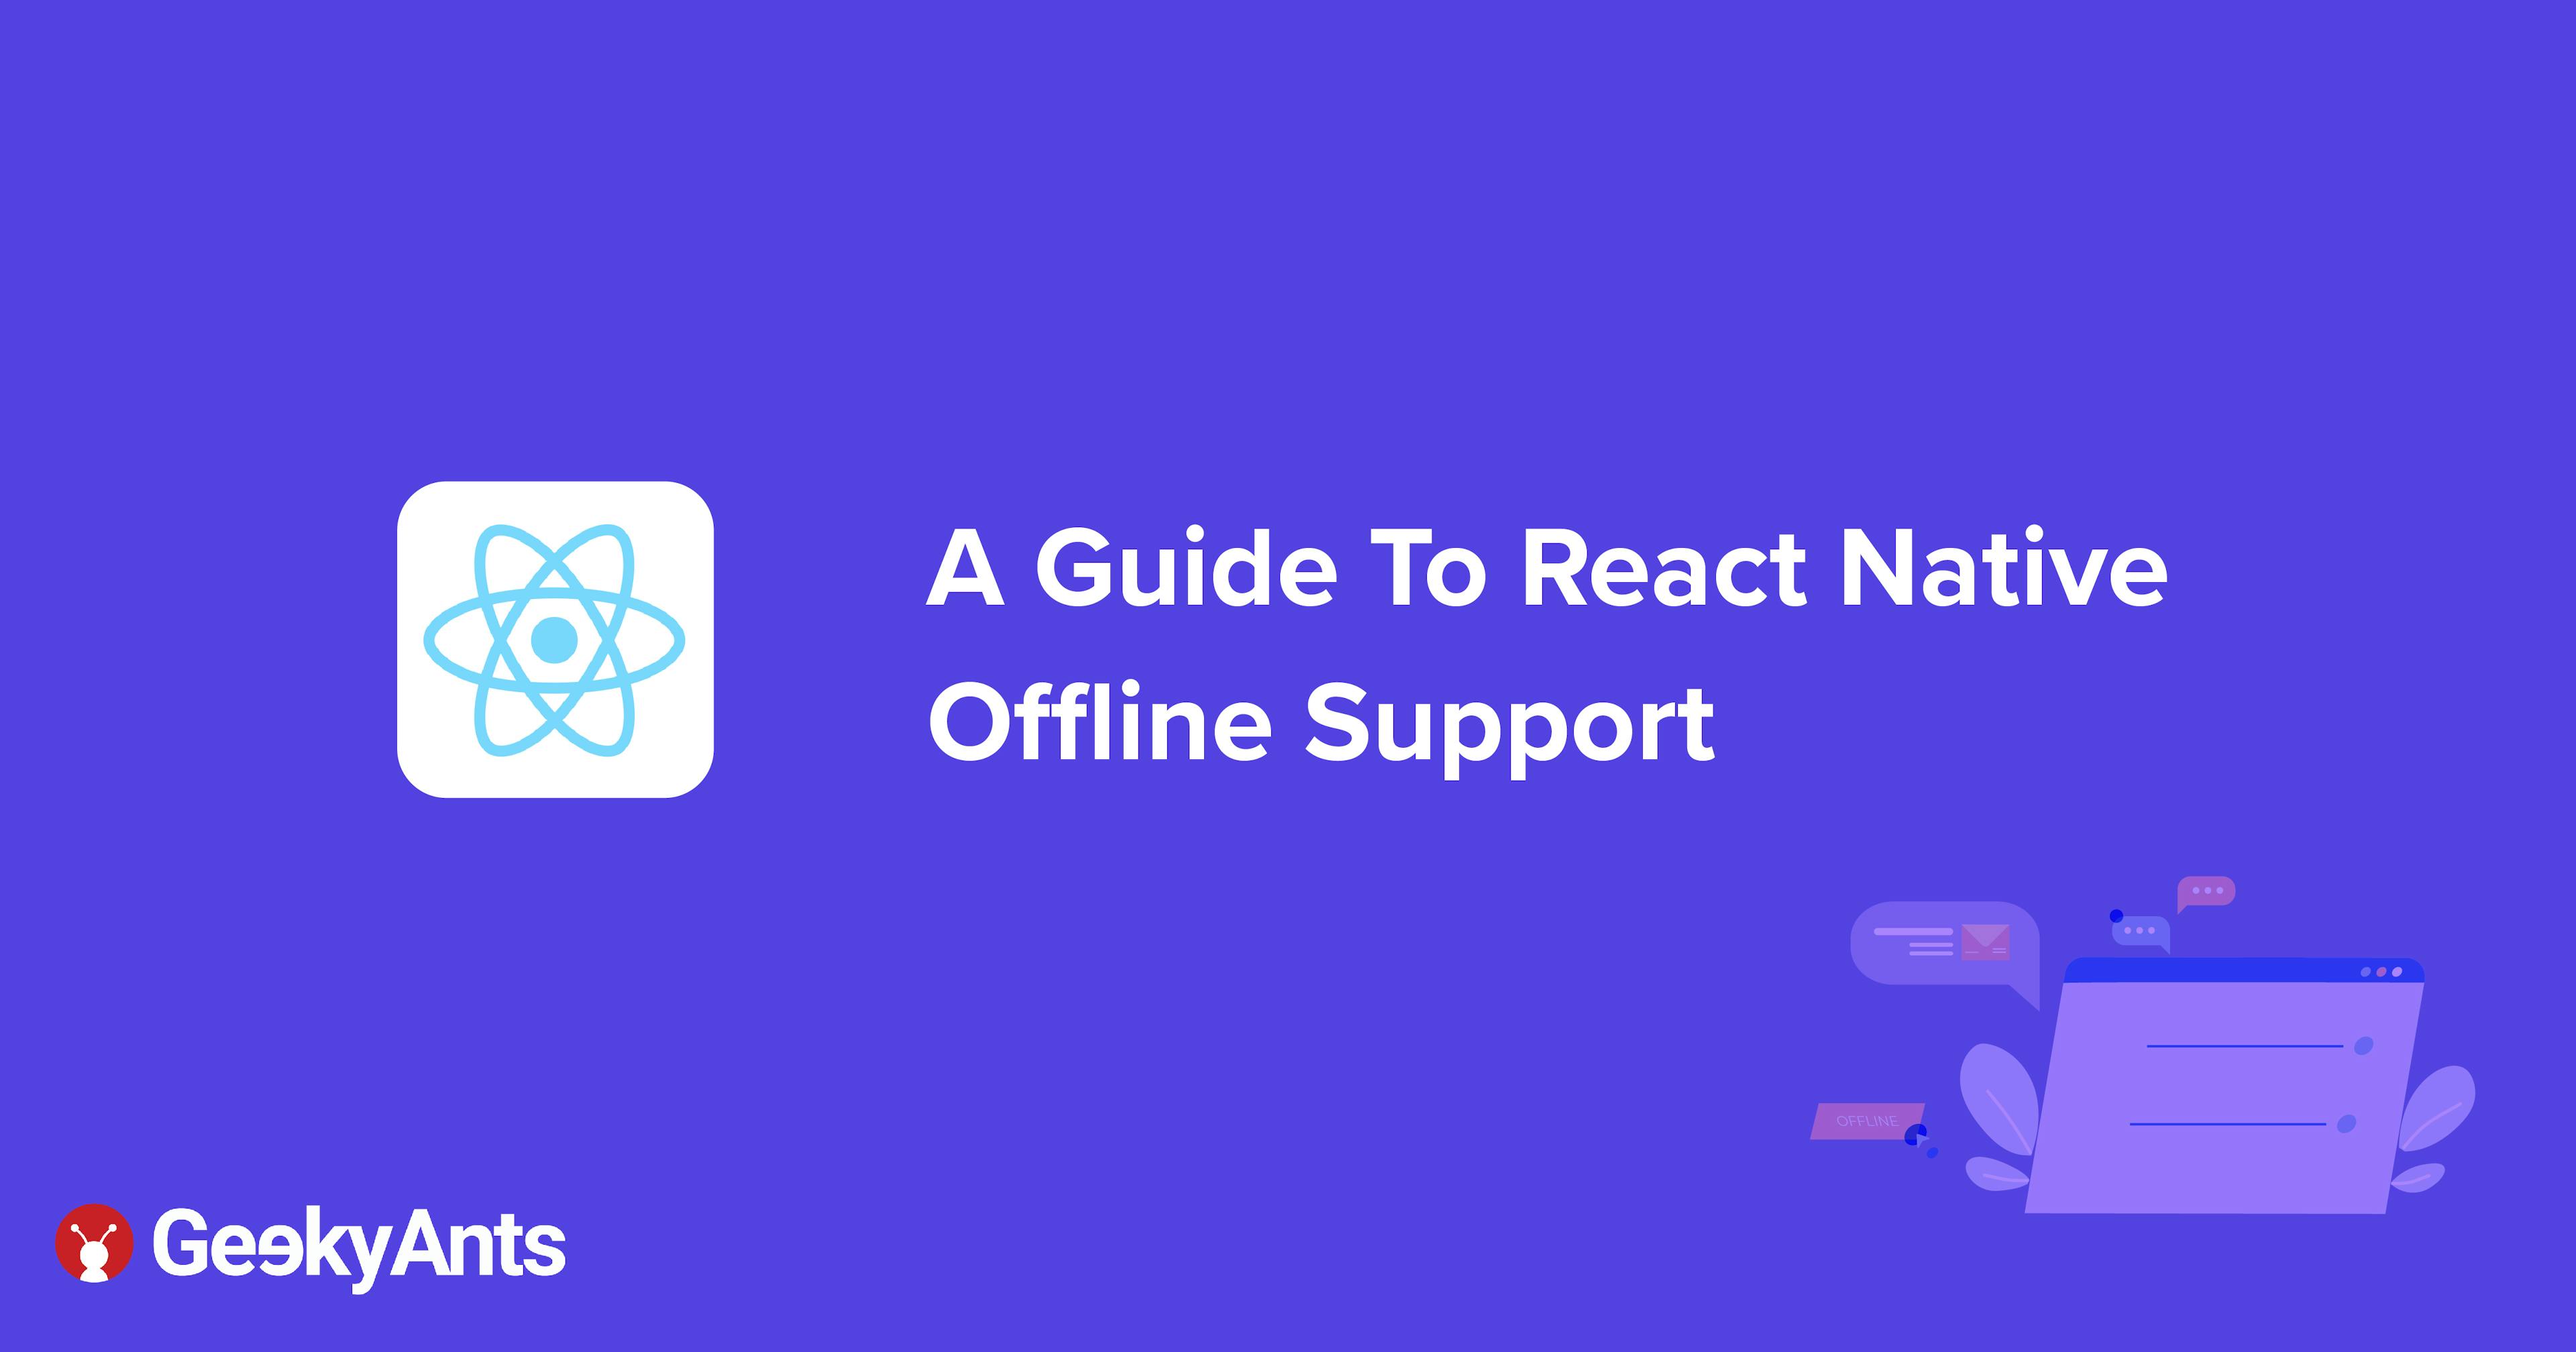 A Guide To React Native Offline Support